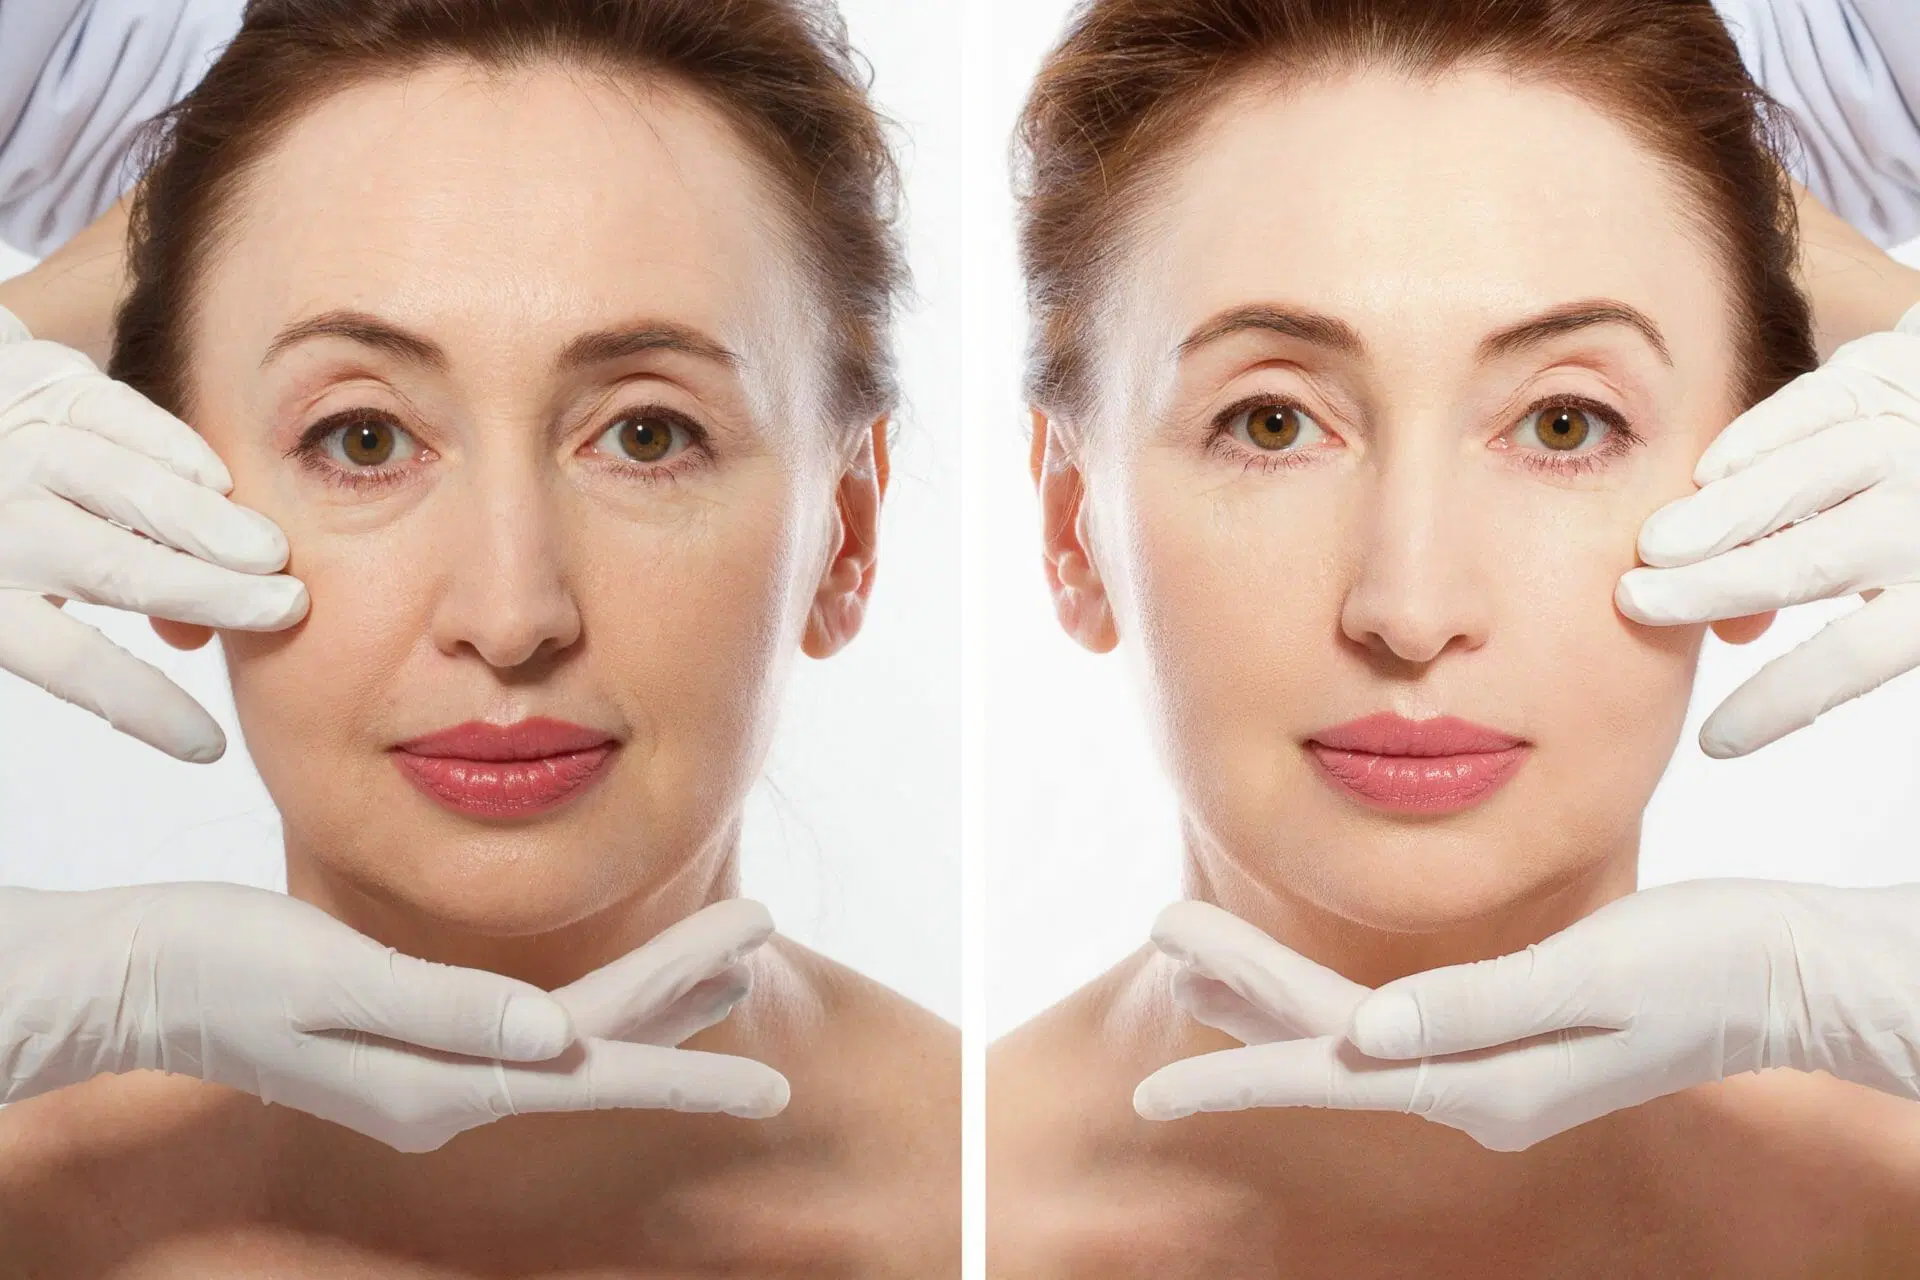 Debunking the Common Mini Face Lift That Most People Have Believed In